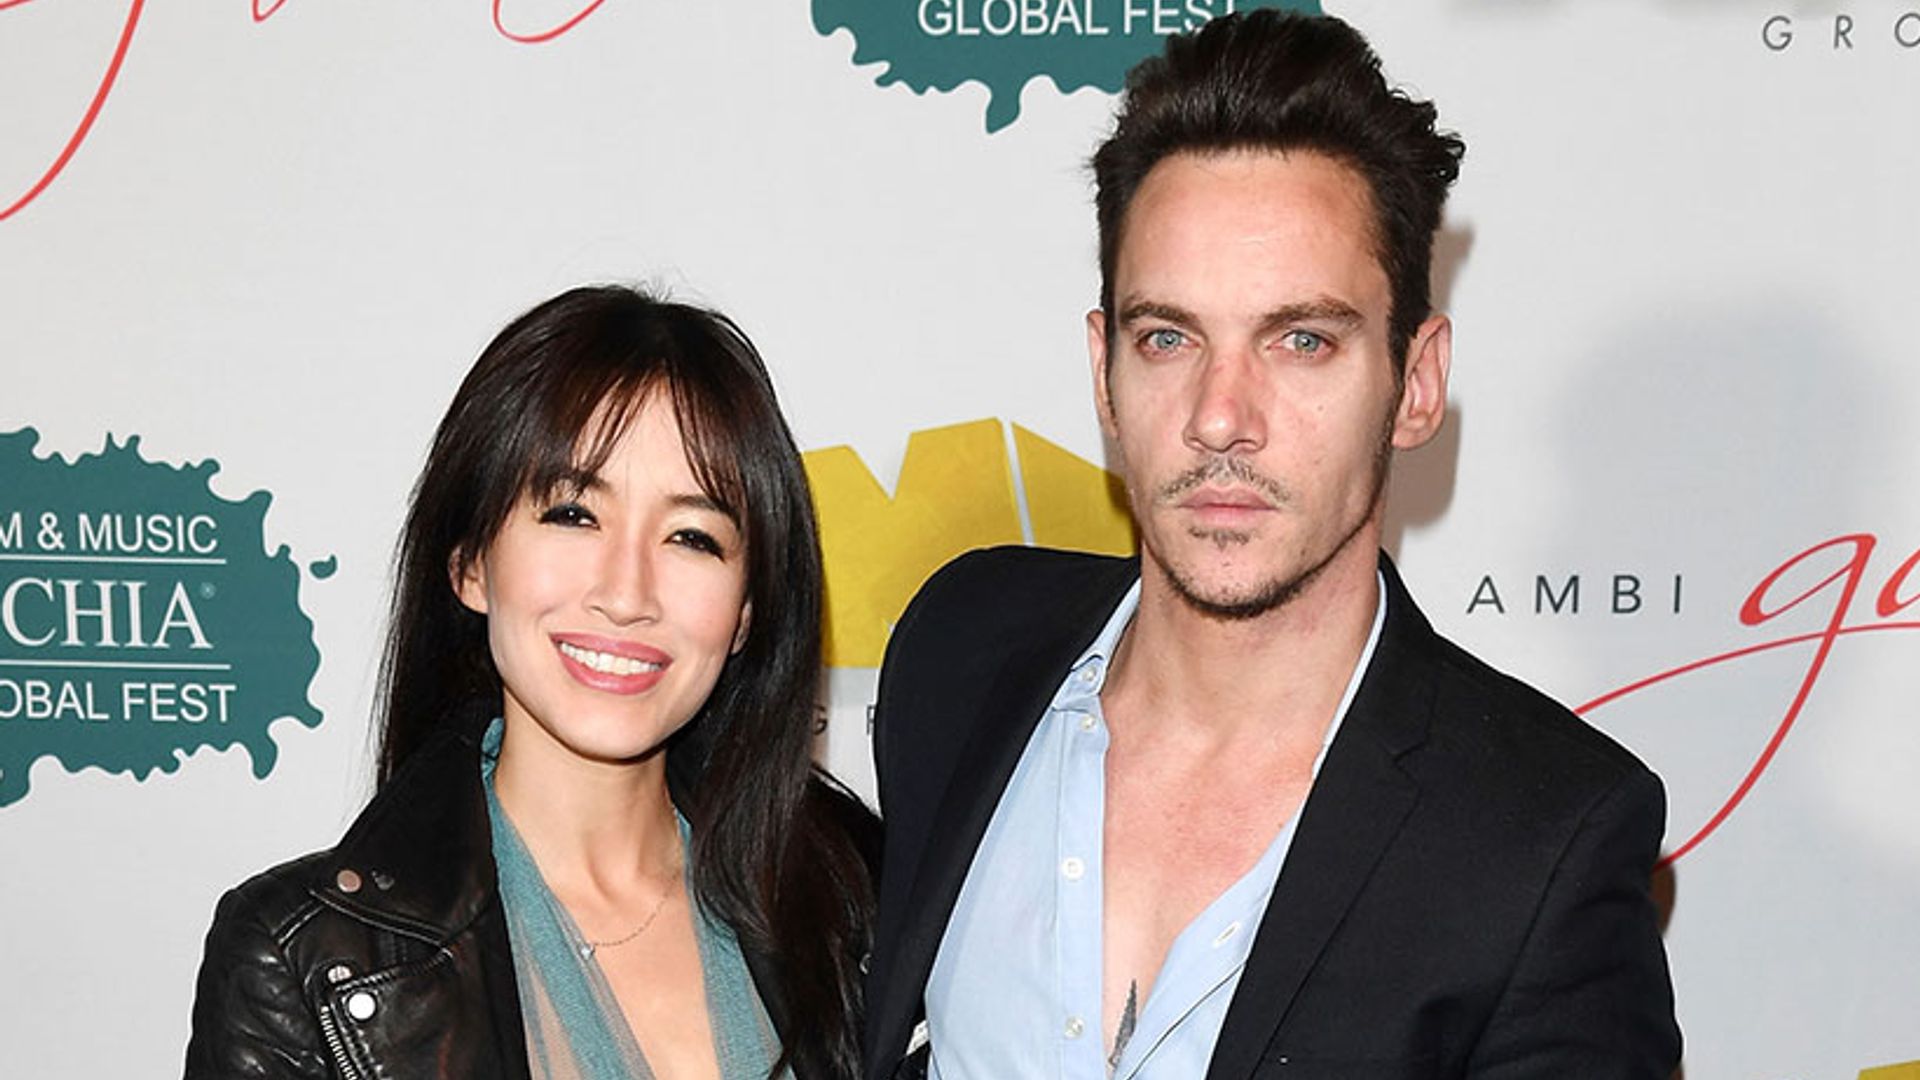 Jonathan Rhys Meyers and partner Mara Lane welcome first child together